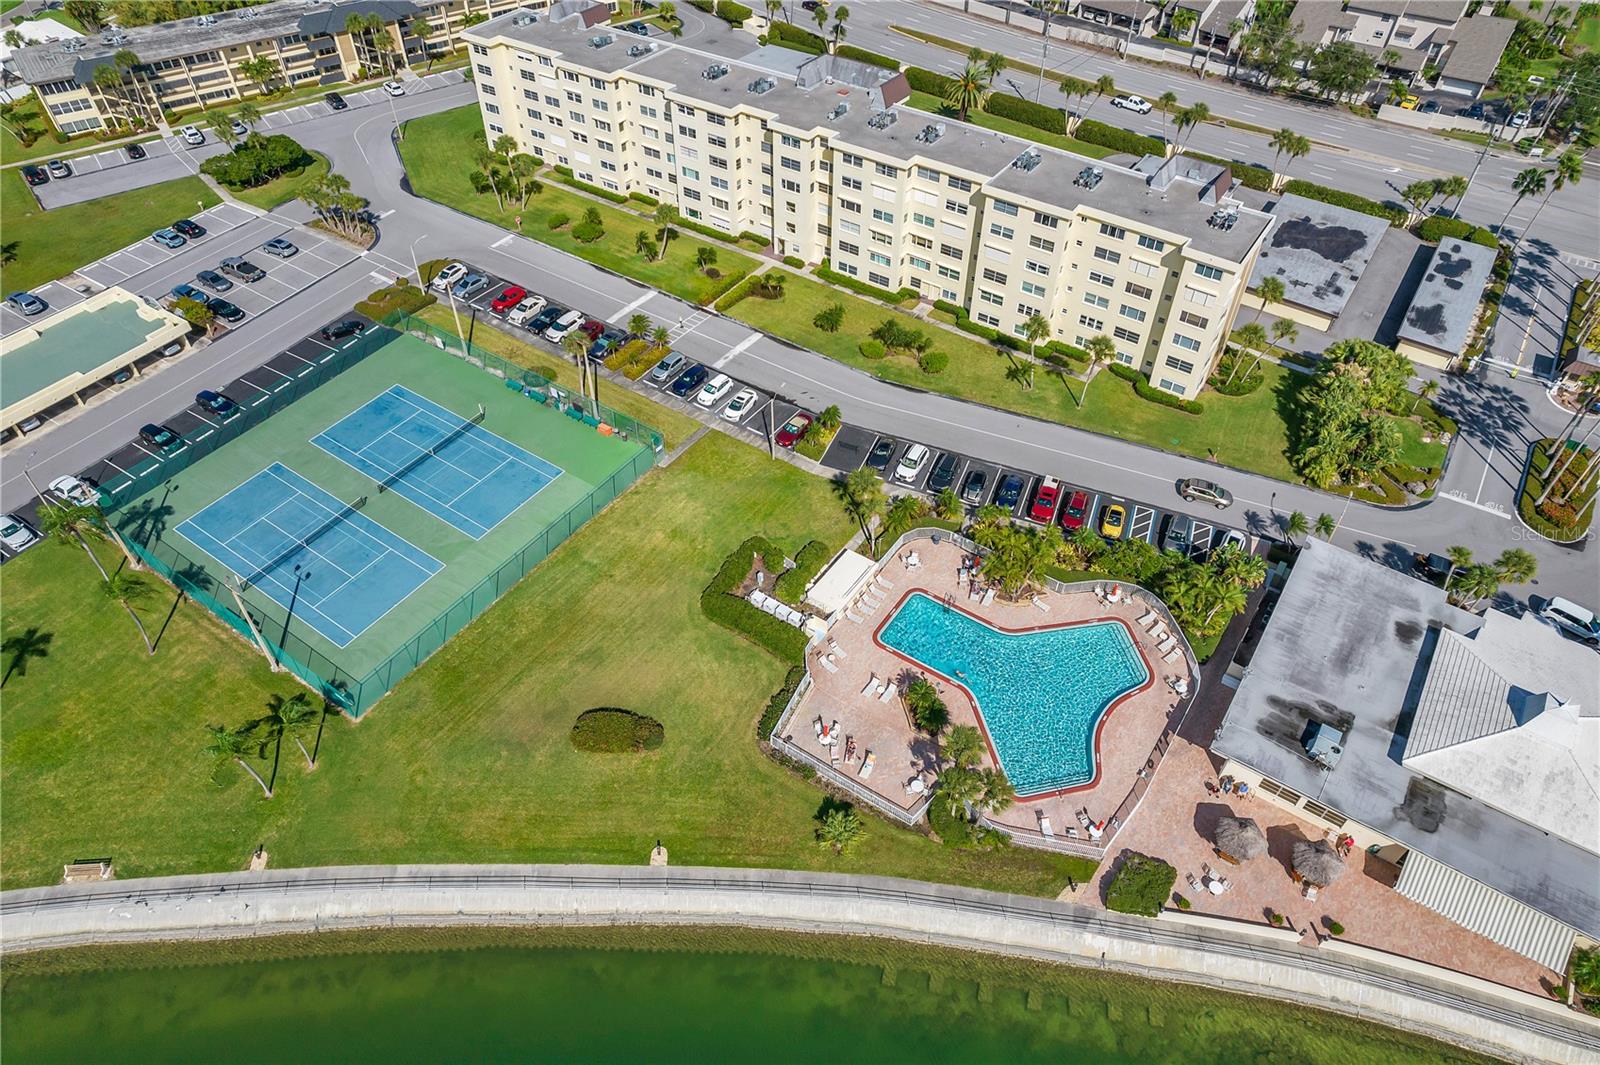 Ariel shot of the tennis court & clubhouse pool.